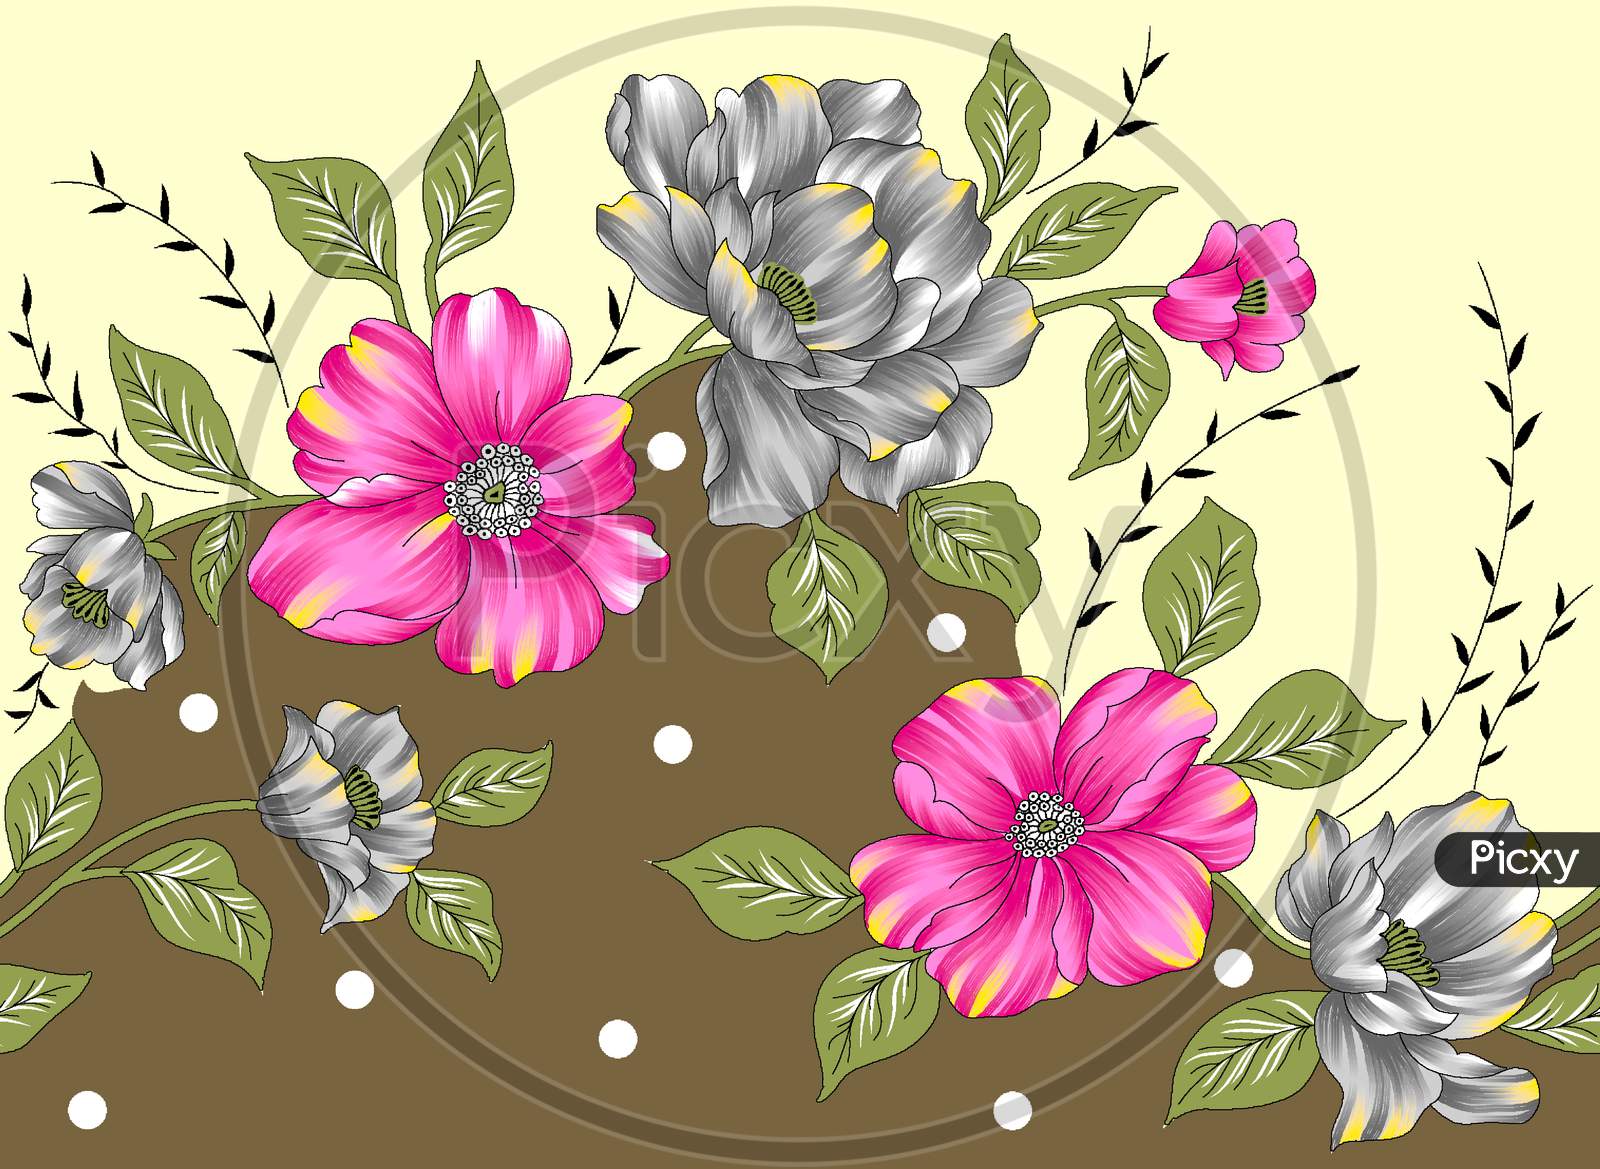 The Leaves And Flowers For Wedding Greeting Card, Textile And Digital Printing Illustration